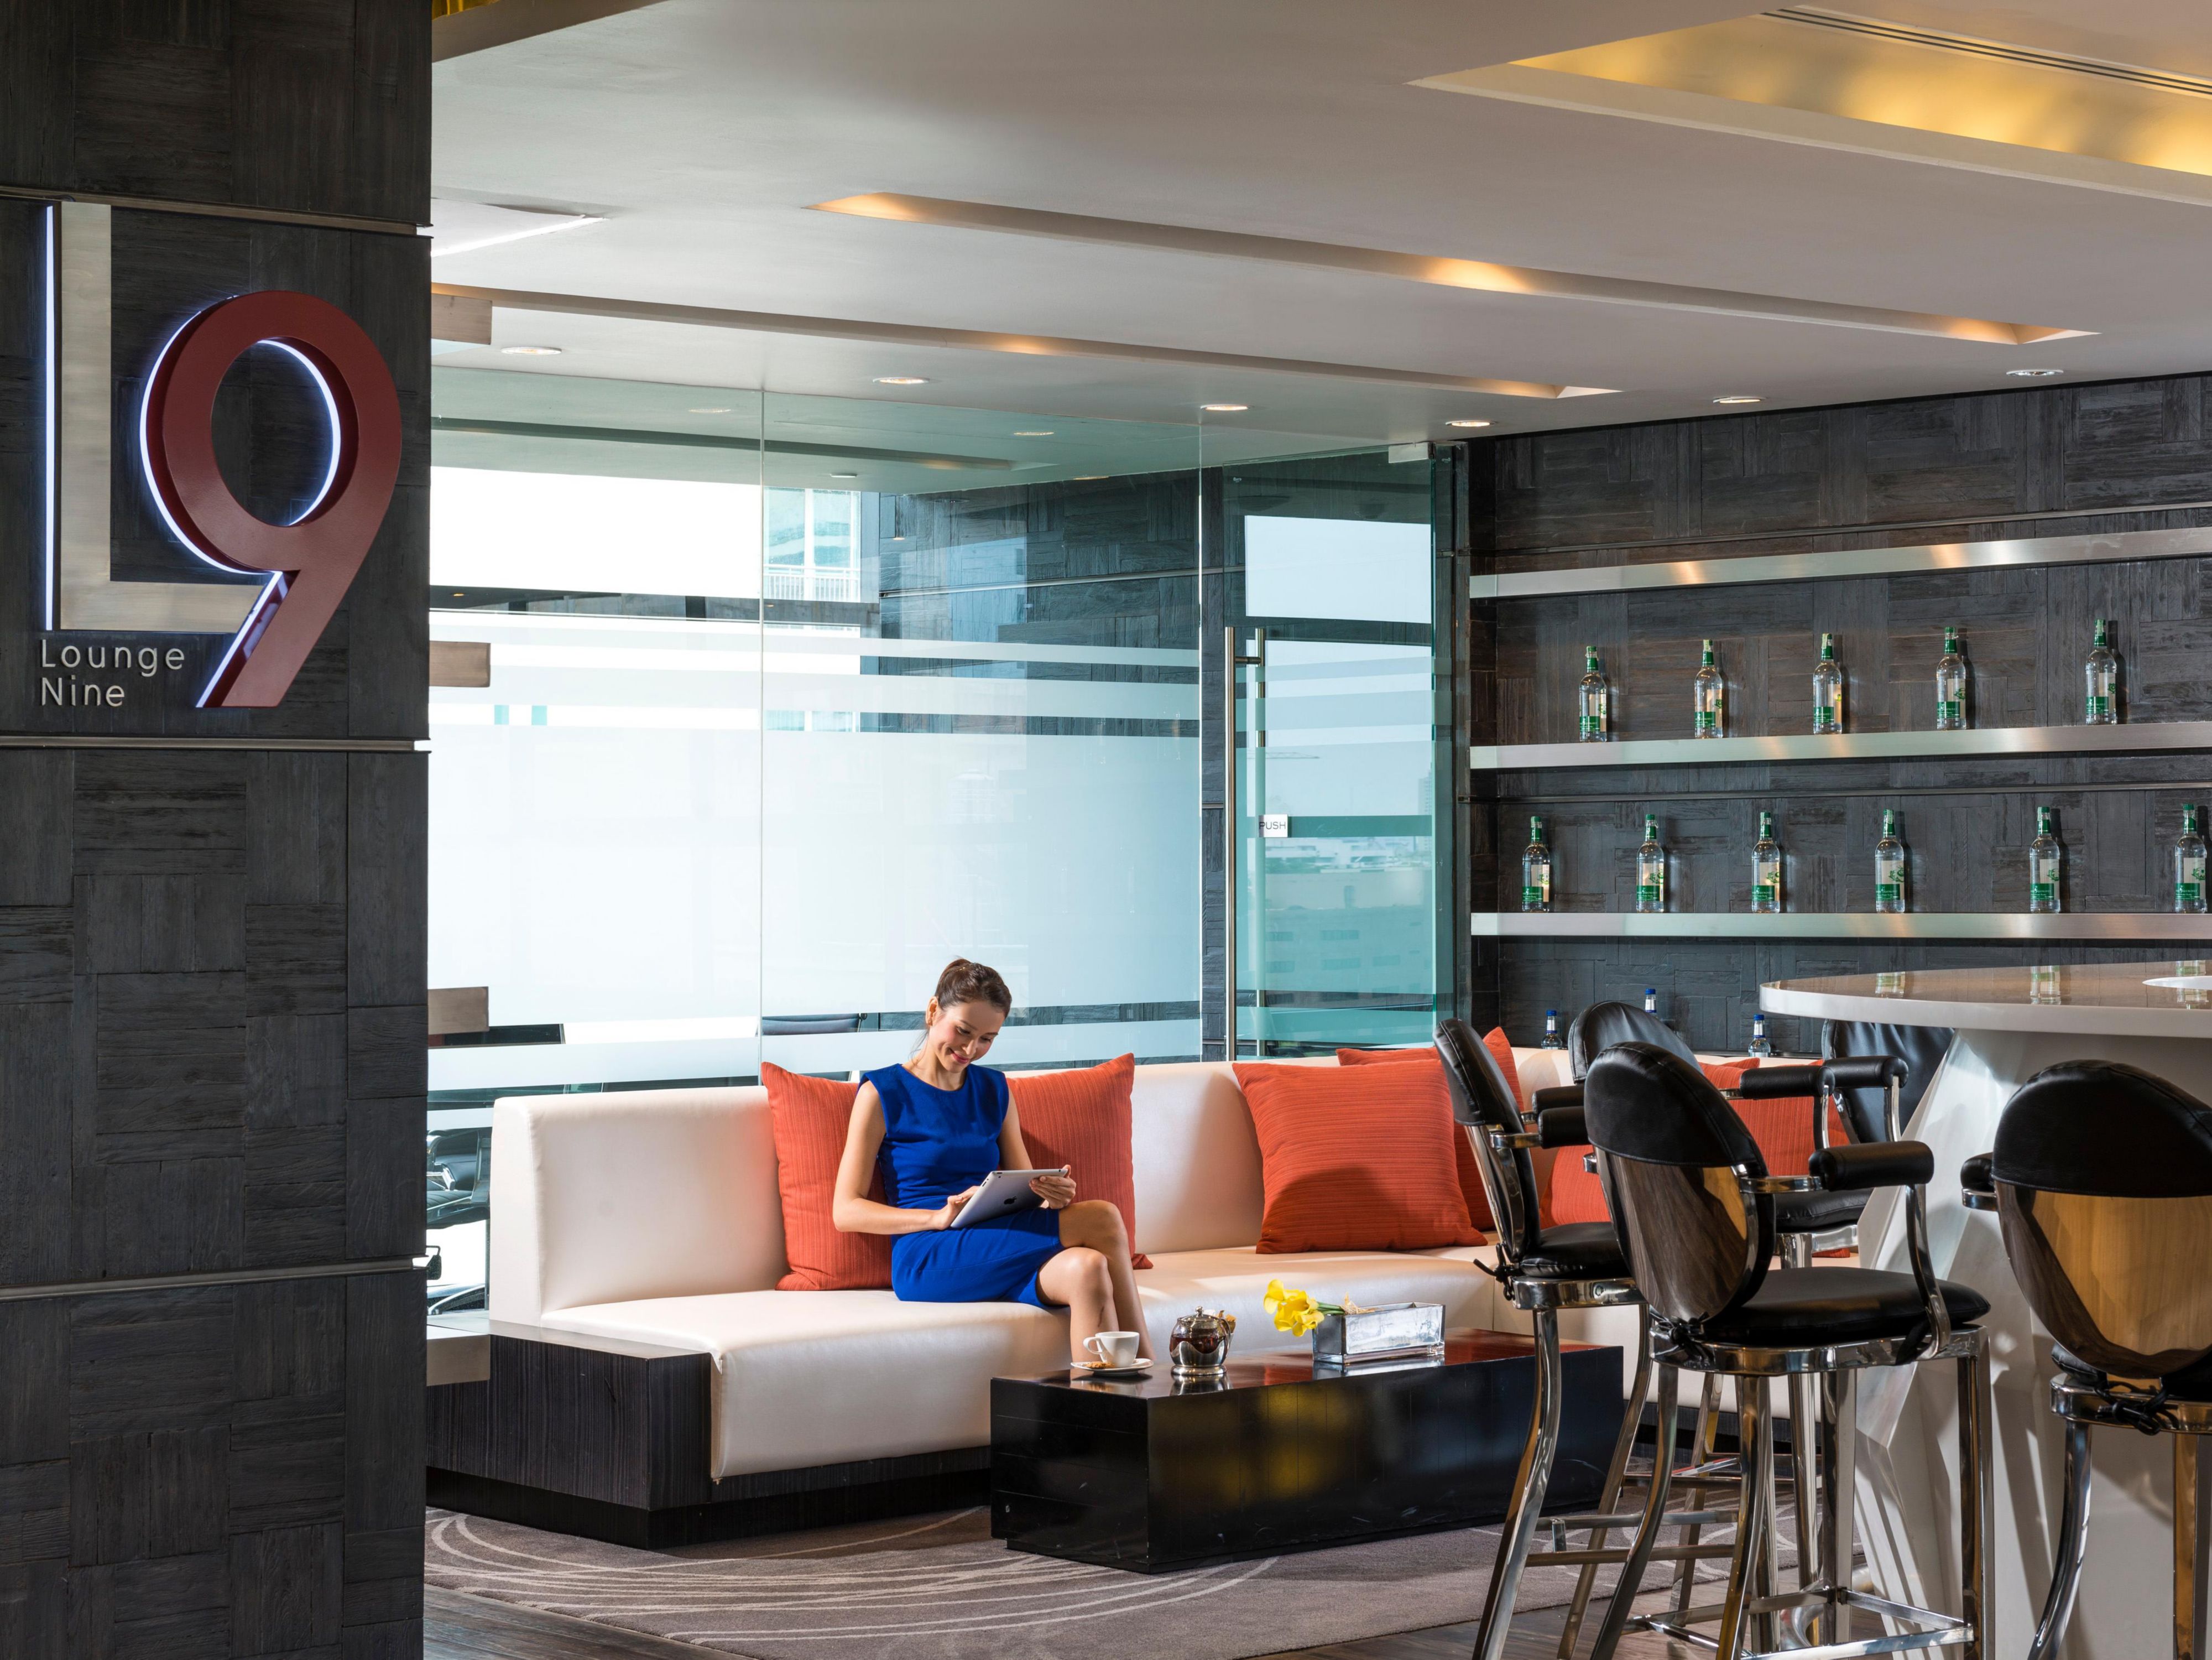 Enjoy gourmet breakfasts, sumptuous snacks and all-day coffee, tea and soft drinks at our exclusive Executive Lounge. Located on the 9th floor, this is a smart and serene space, the perfect escape from the hustle and rush of Bangkok – great for unwinding or catching up on some work.